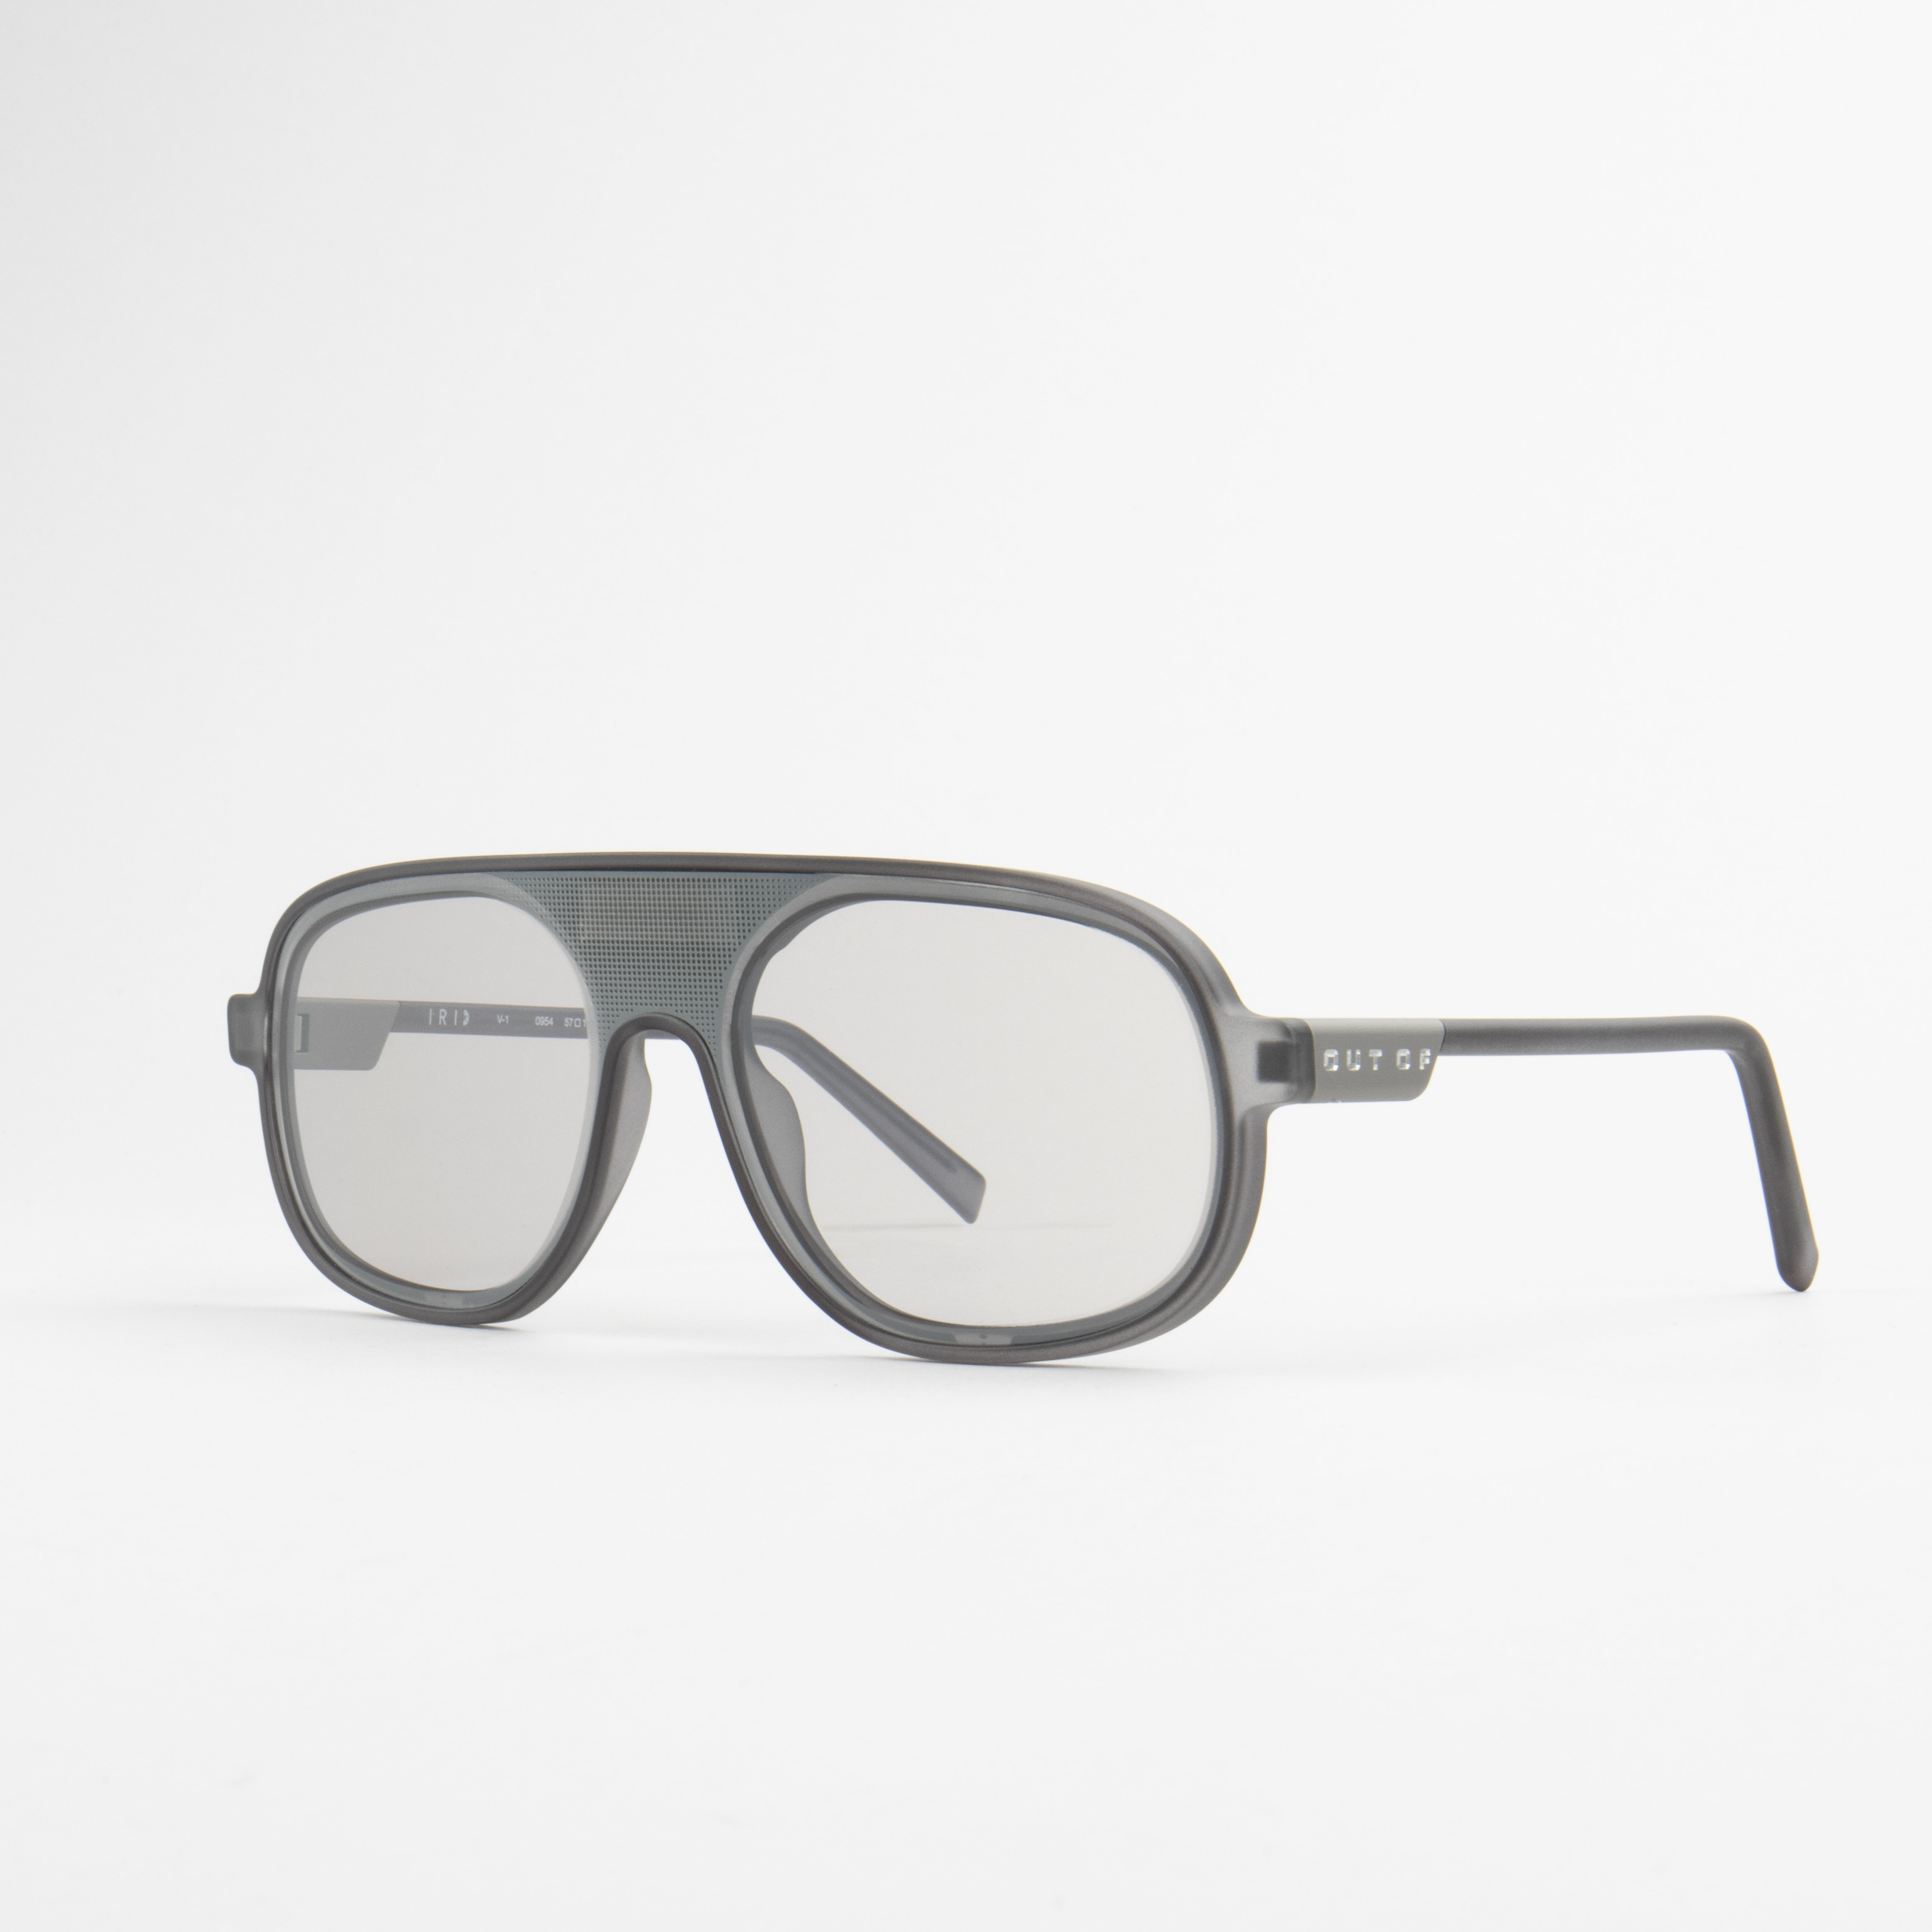 V-1 sunglasses with IRID X-10 lens color: Frost grey/silver